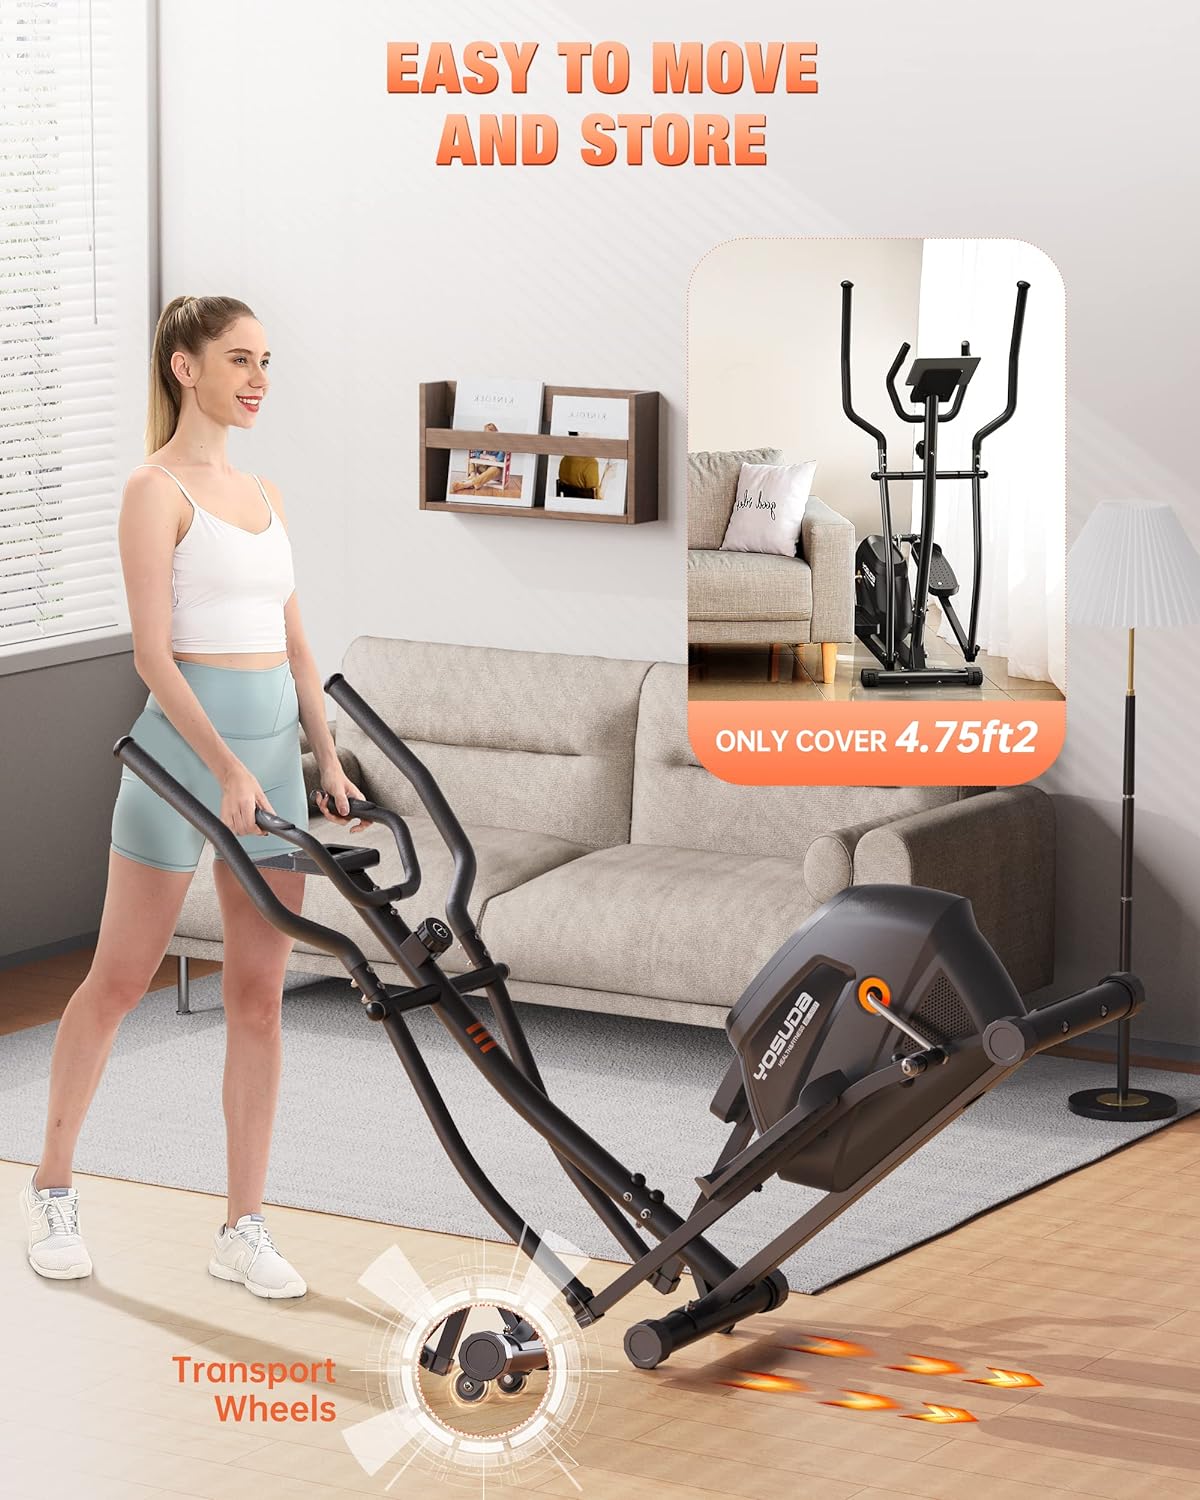 Amazon.com : YOSUDA Compact Elliptical Machine - Elliptical Machine for Home Use with Hyper-Quiet Magnetic Drive System, 16 Levels Adjustable Resistance, with LCD Monitor Ipad Mount : Sports Outdoors